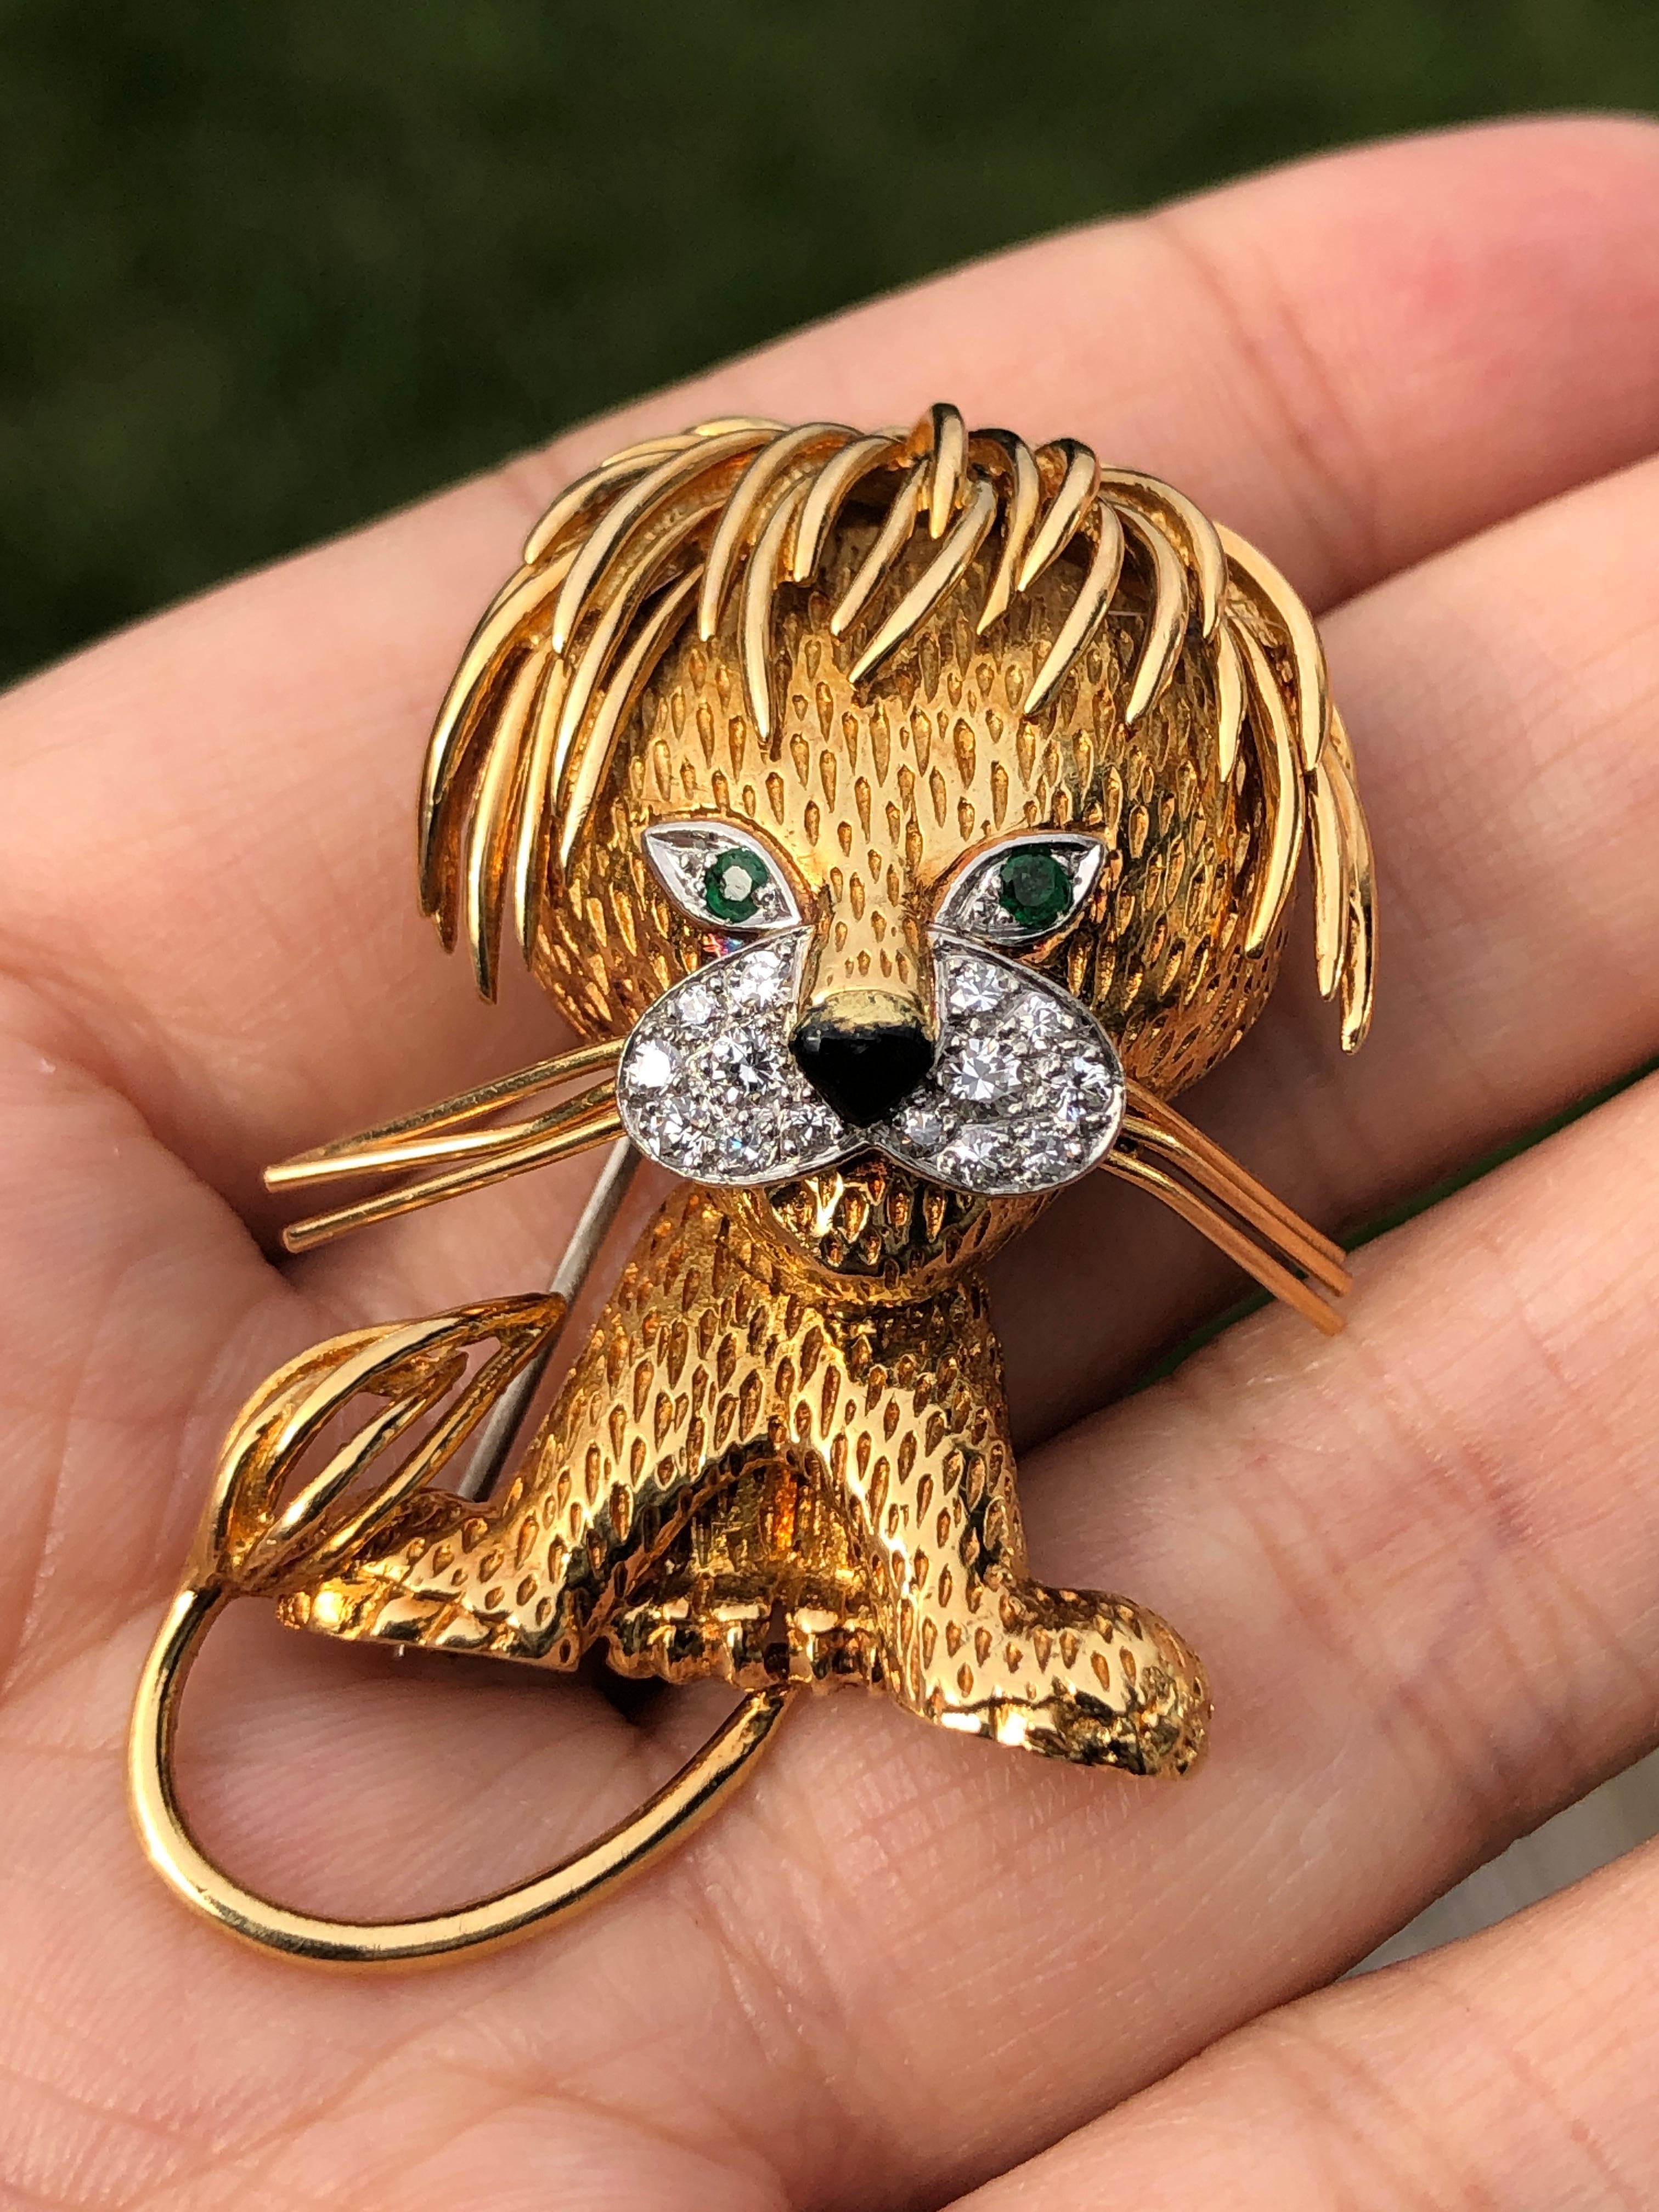 Circa 1970s Van Cleef and Arpels France 18K Yellow Gold Lion Clip brooch, measuring 4.6cm in length and 3cm wide. finely detailed, set with Emerald Eyes and Diamonds around the mouth and further decorated with a Black enamel nose.  This is the